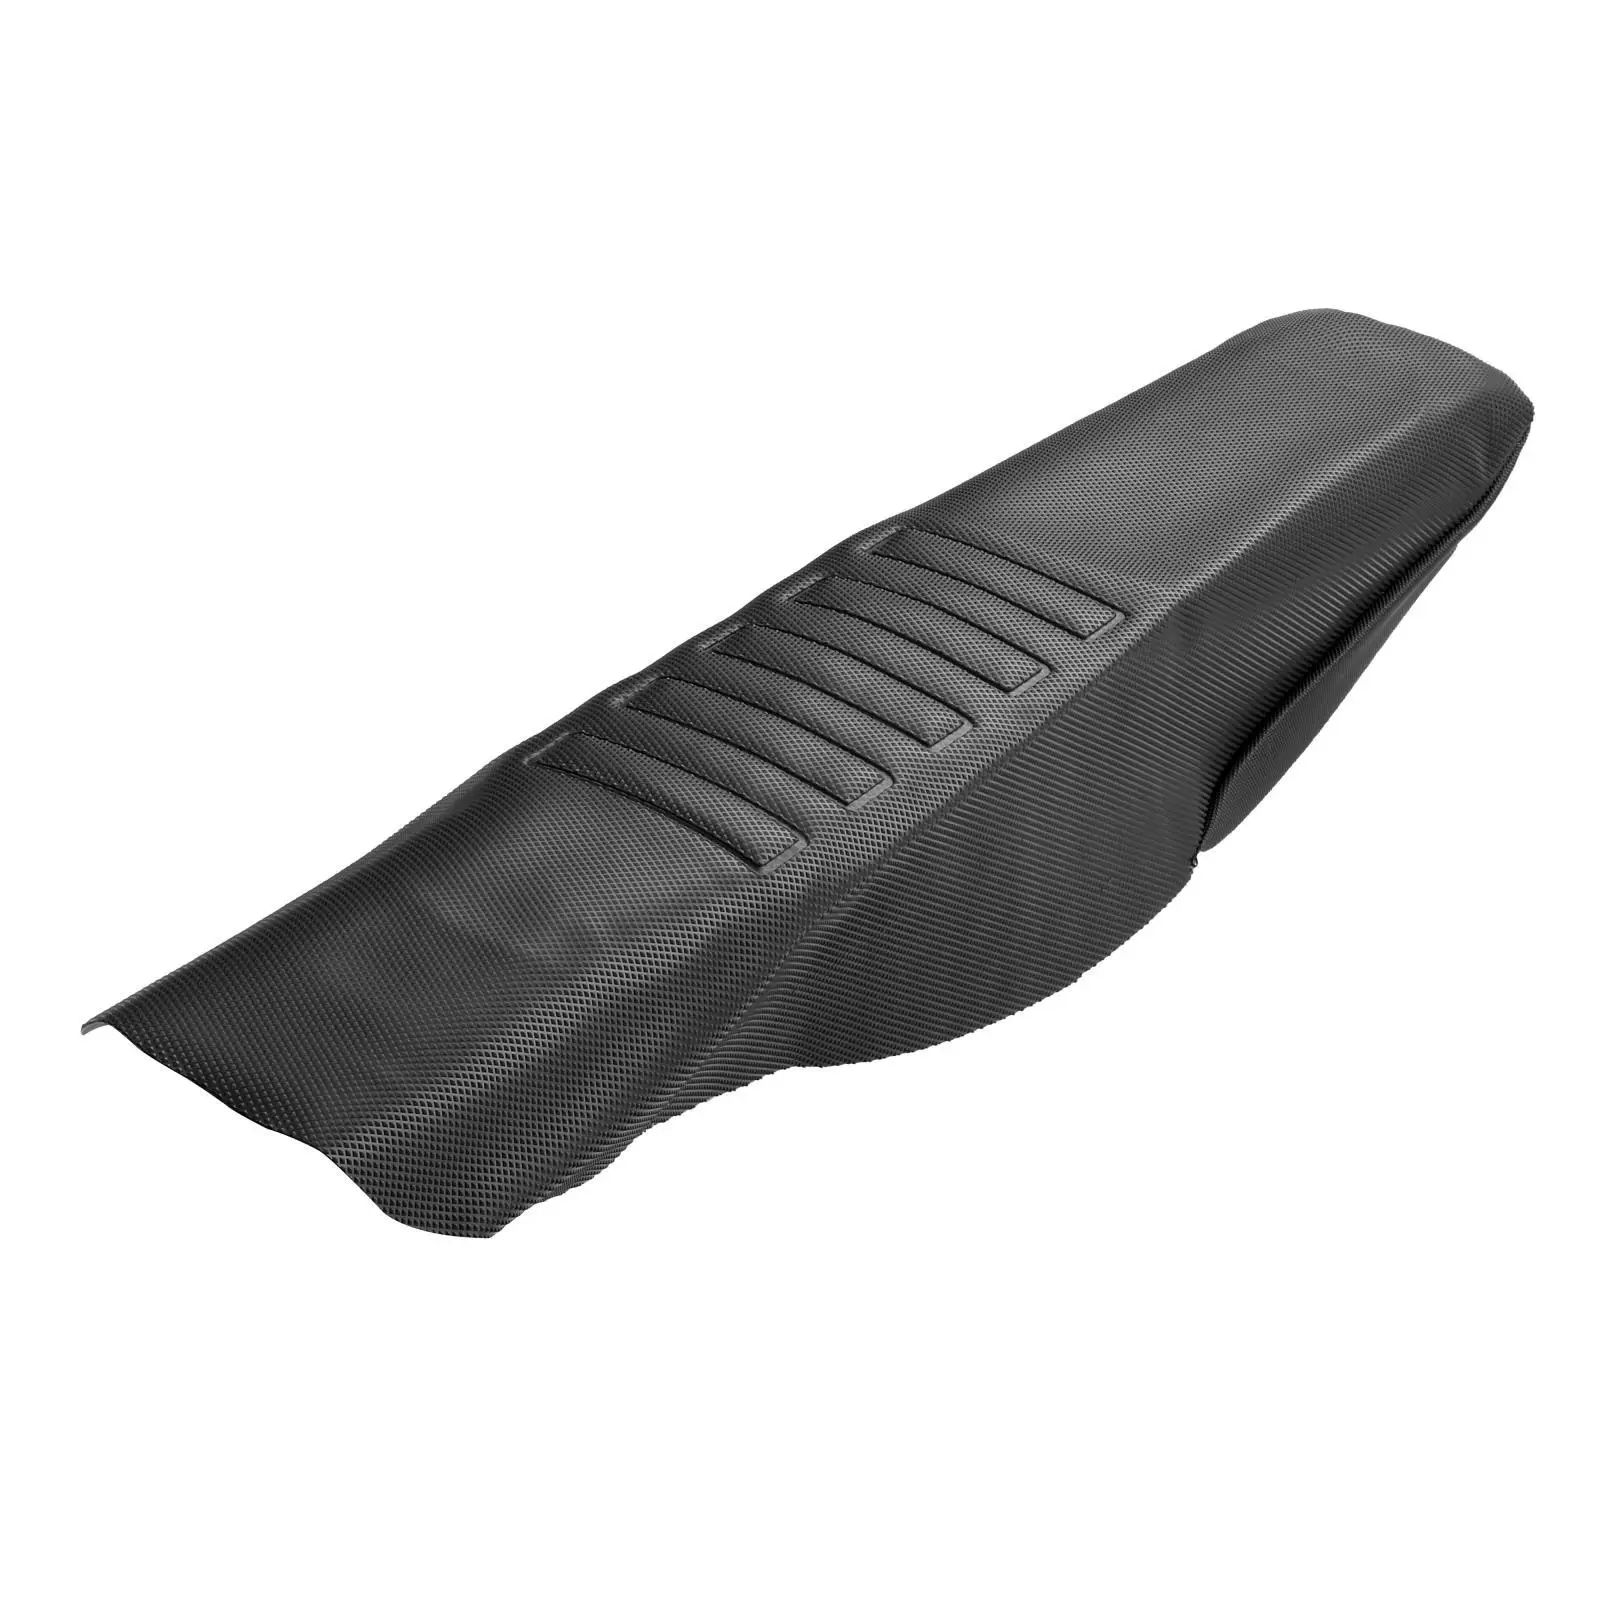 Motorcycle Seat Cushion Heat Resistant Non-Slip EVA Material Thick Particles